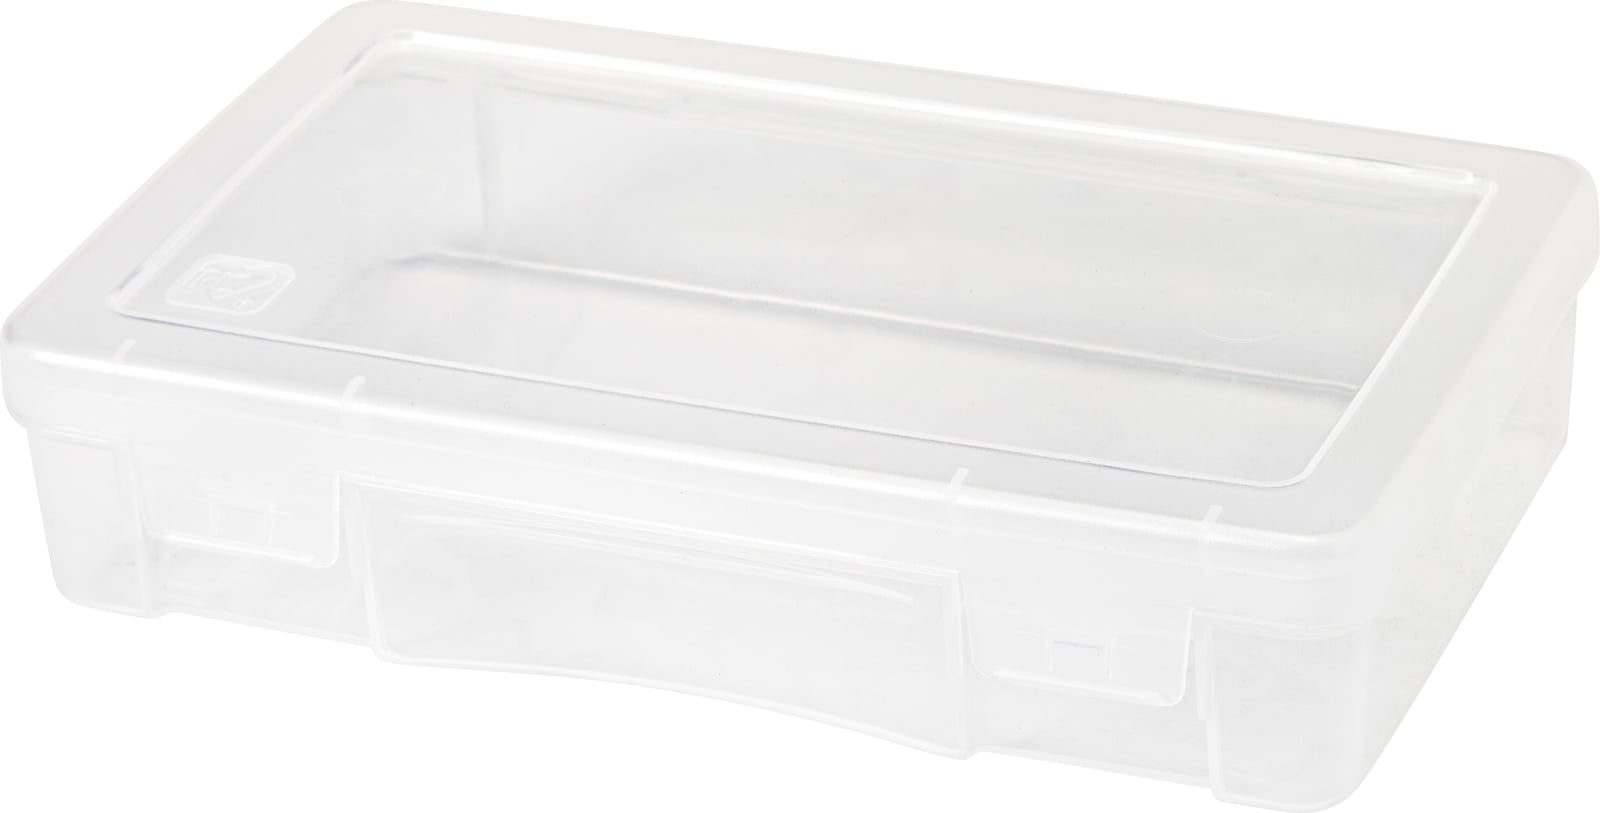 Iris Usa 10pack Medium Clear Plastic Storage Containers With Latching Lid  For Pencil Box, Lego, Crayon : Target